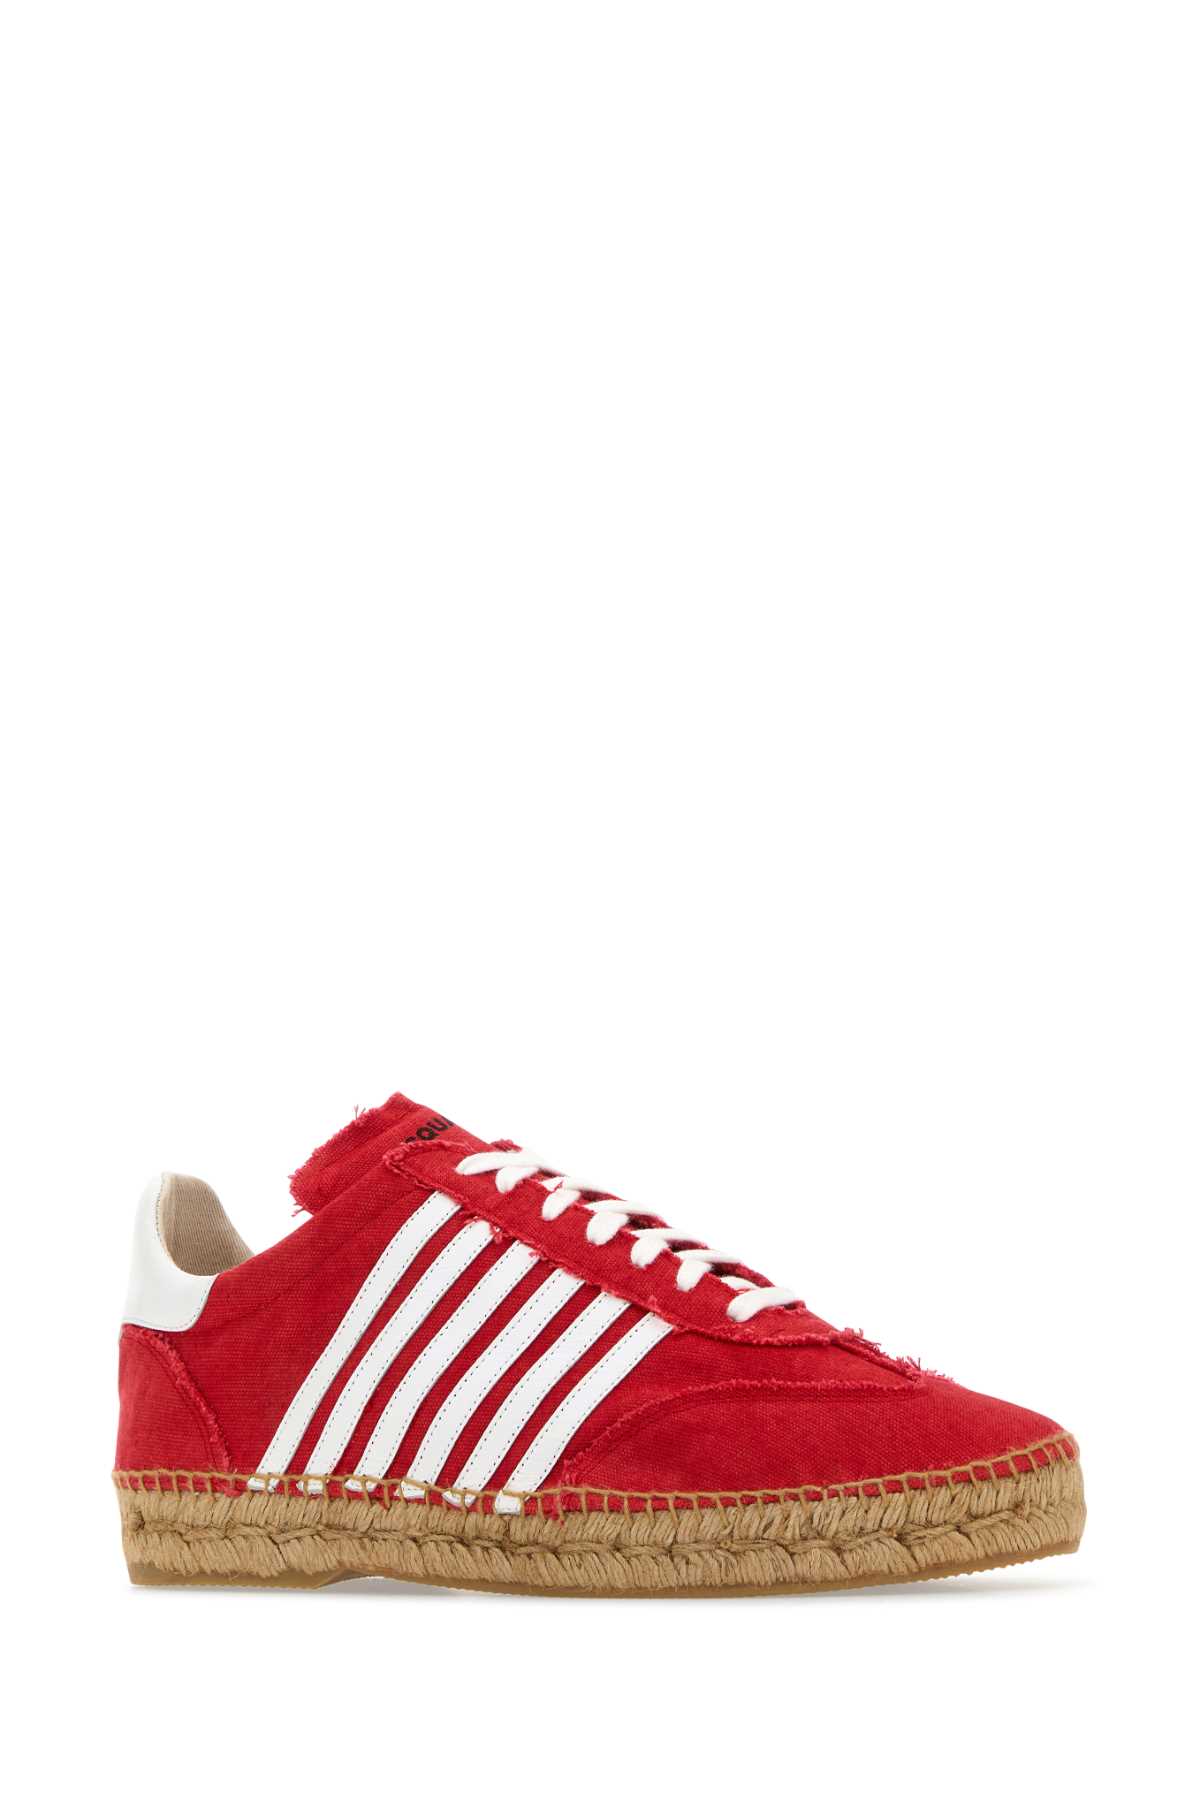 DSQUARED2 RED CANVAS SNEAKERS